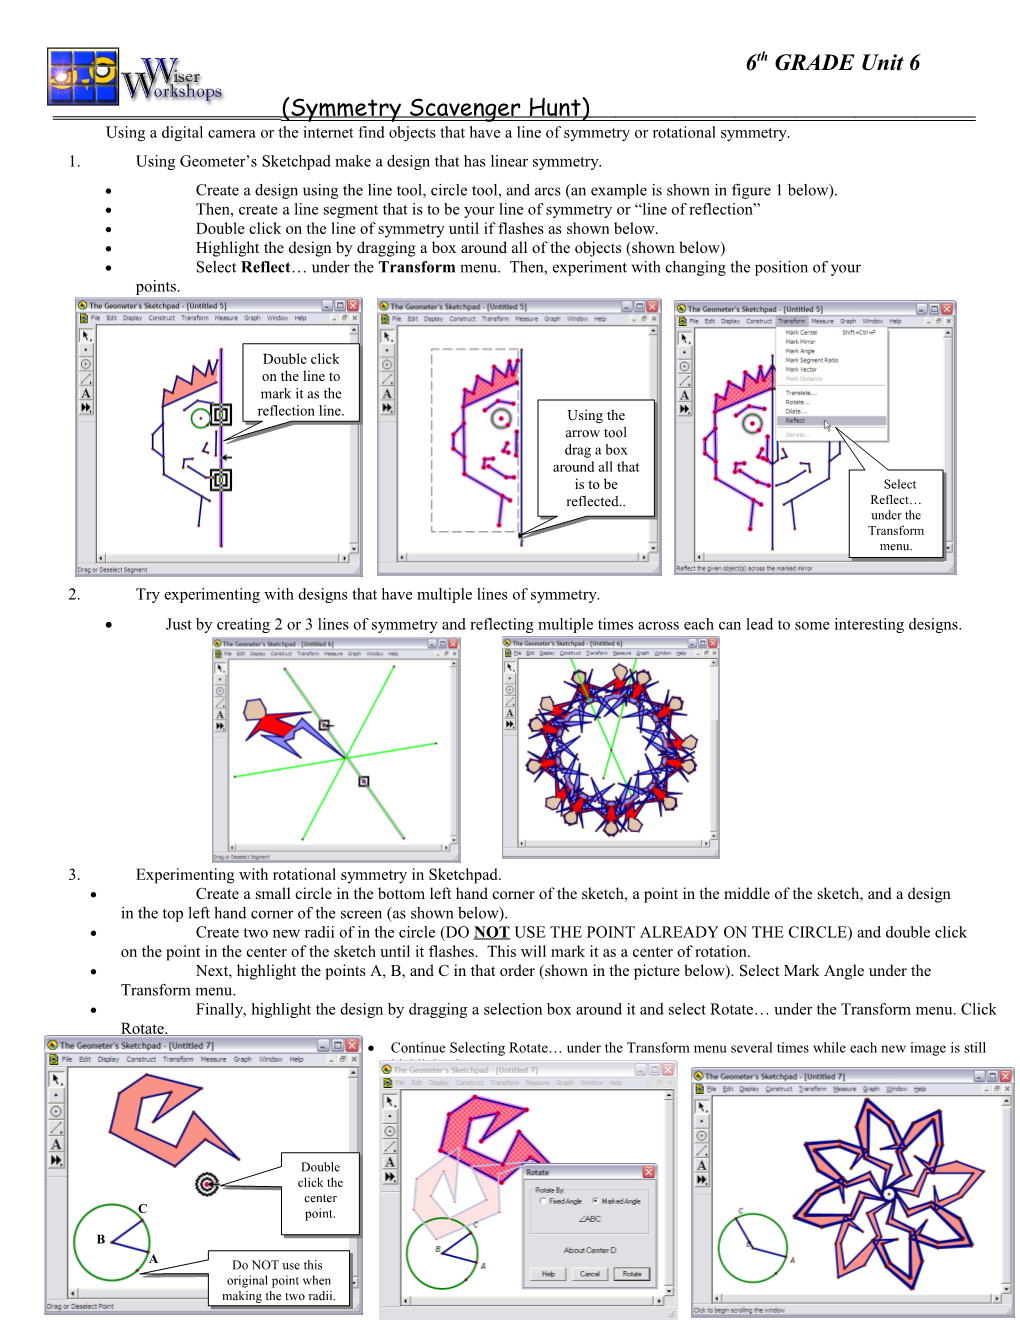 1. Using Geometer S Sketchpad Make a Design That Has Linear Symmetry